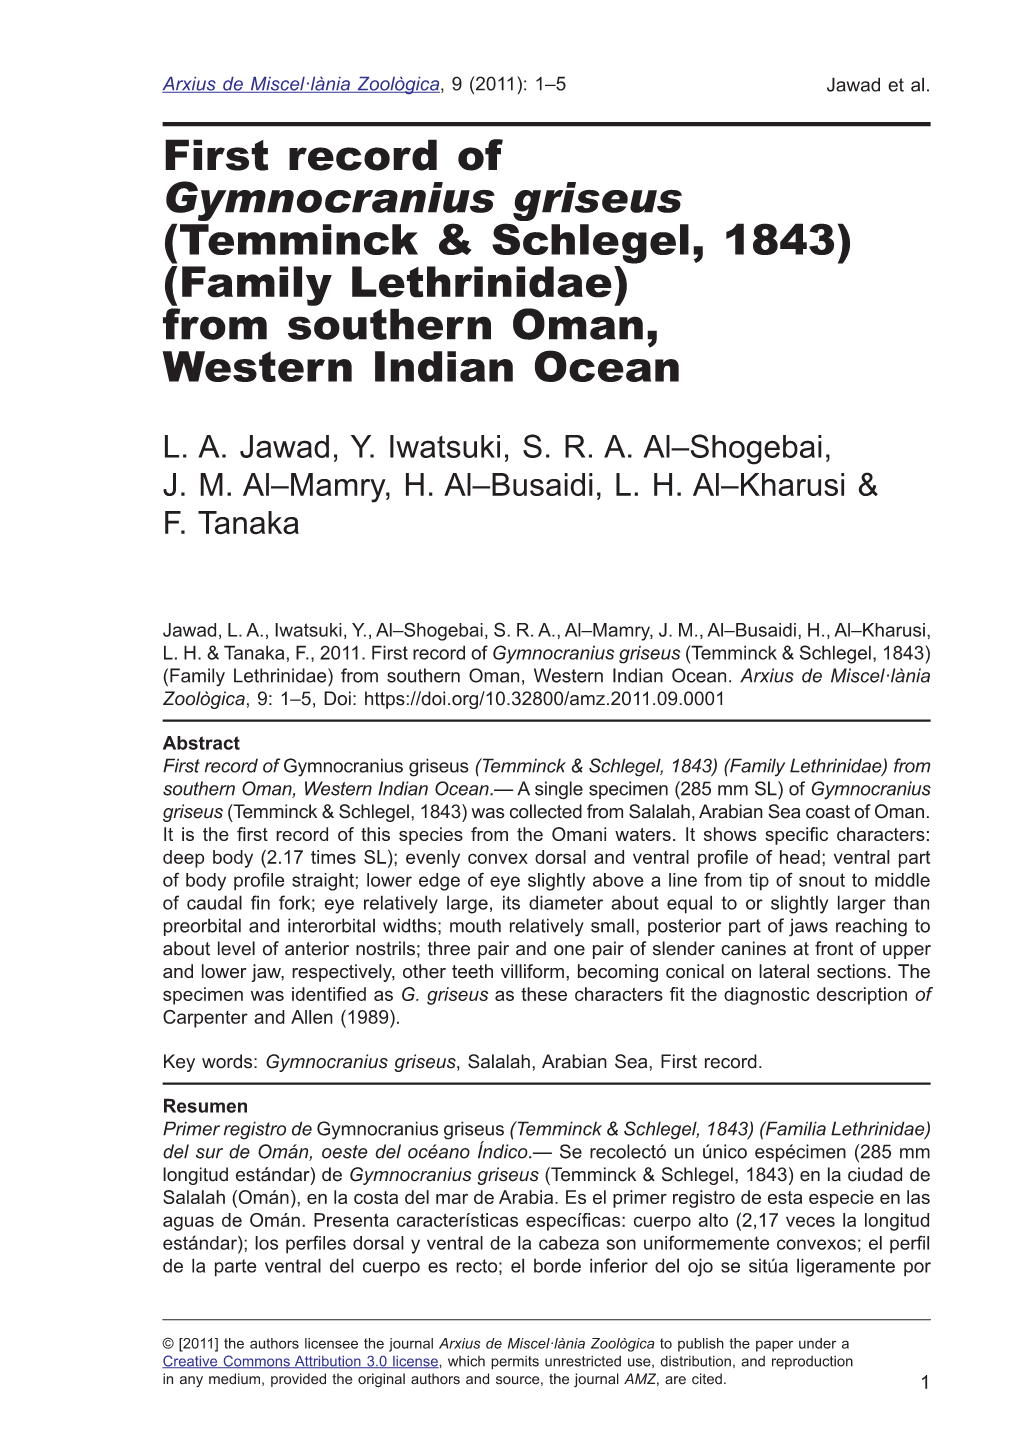 First Record of Gymnocranius Griseus (Temminck & Schlegel, 1843) (Family Lethrinidae) from Southern Oman, Western Indian Ocean